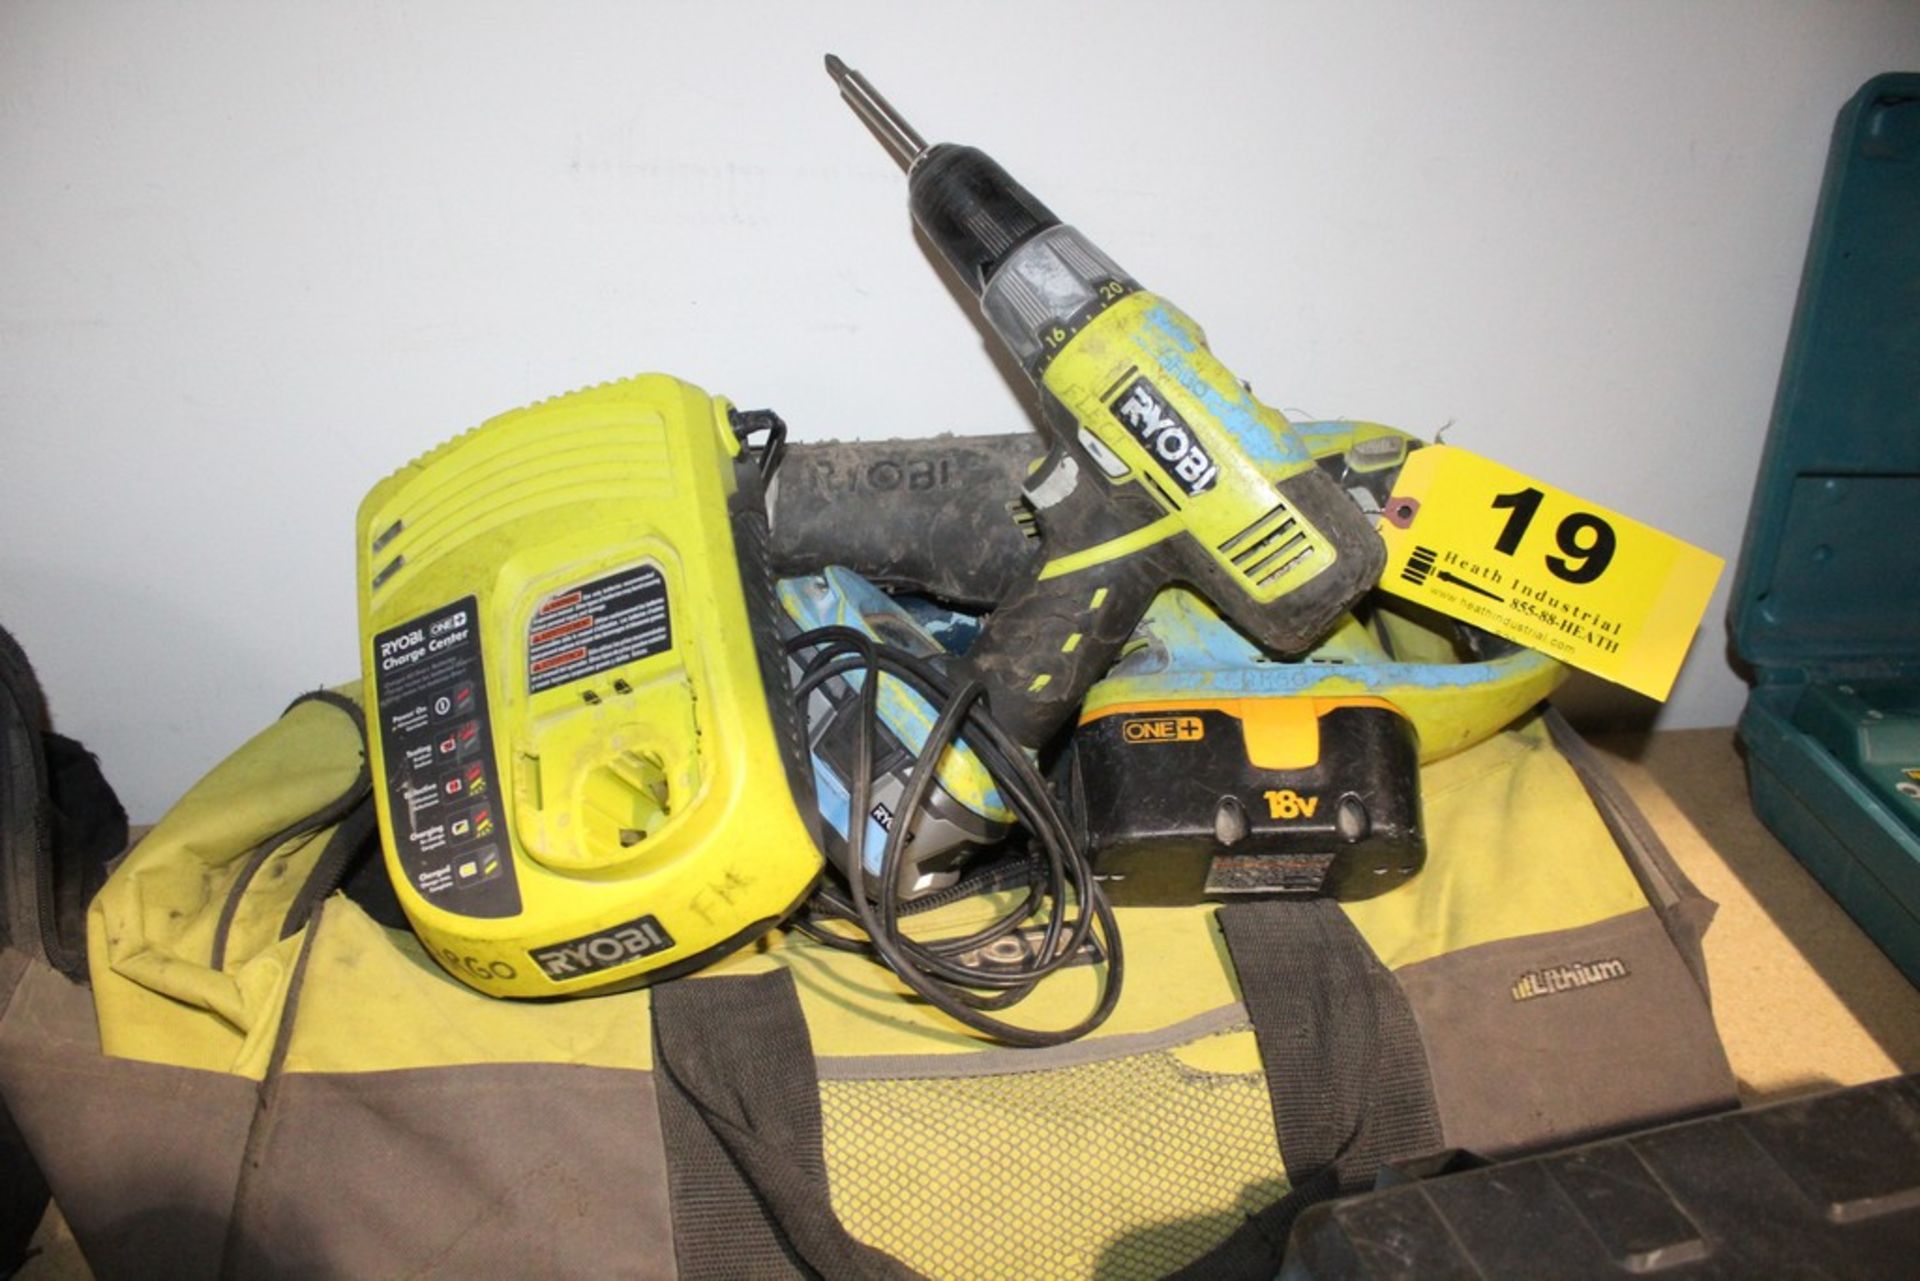 RYOBI KIT, INCLUDES MODEL P513 CORDLESS RECIPROCATING SAW AND MODEL P203 CORDLESS DRILL WITH